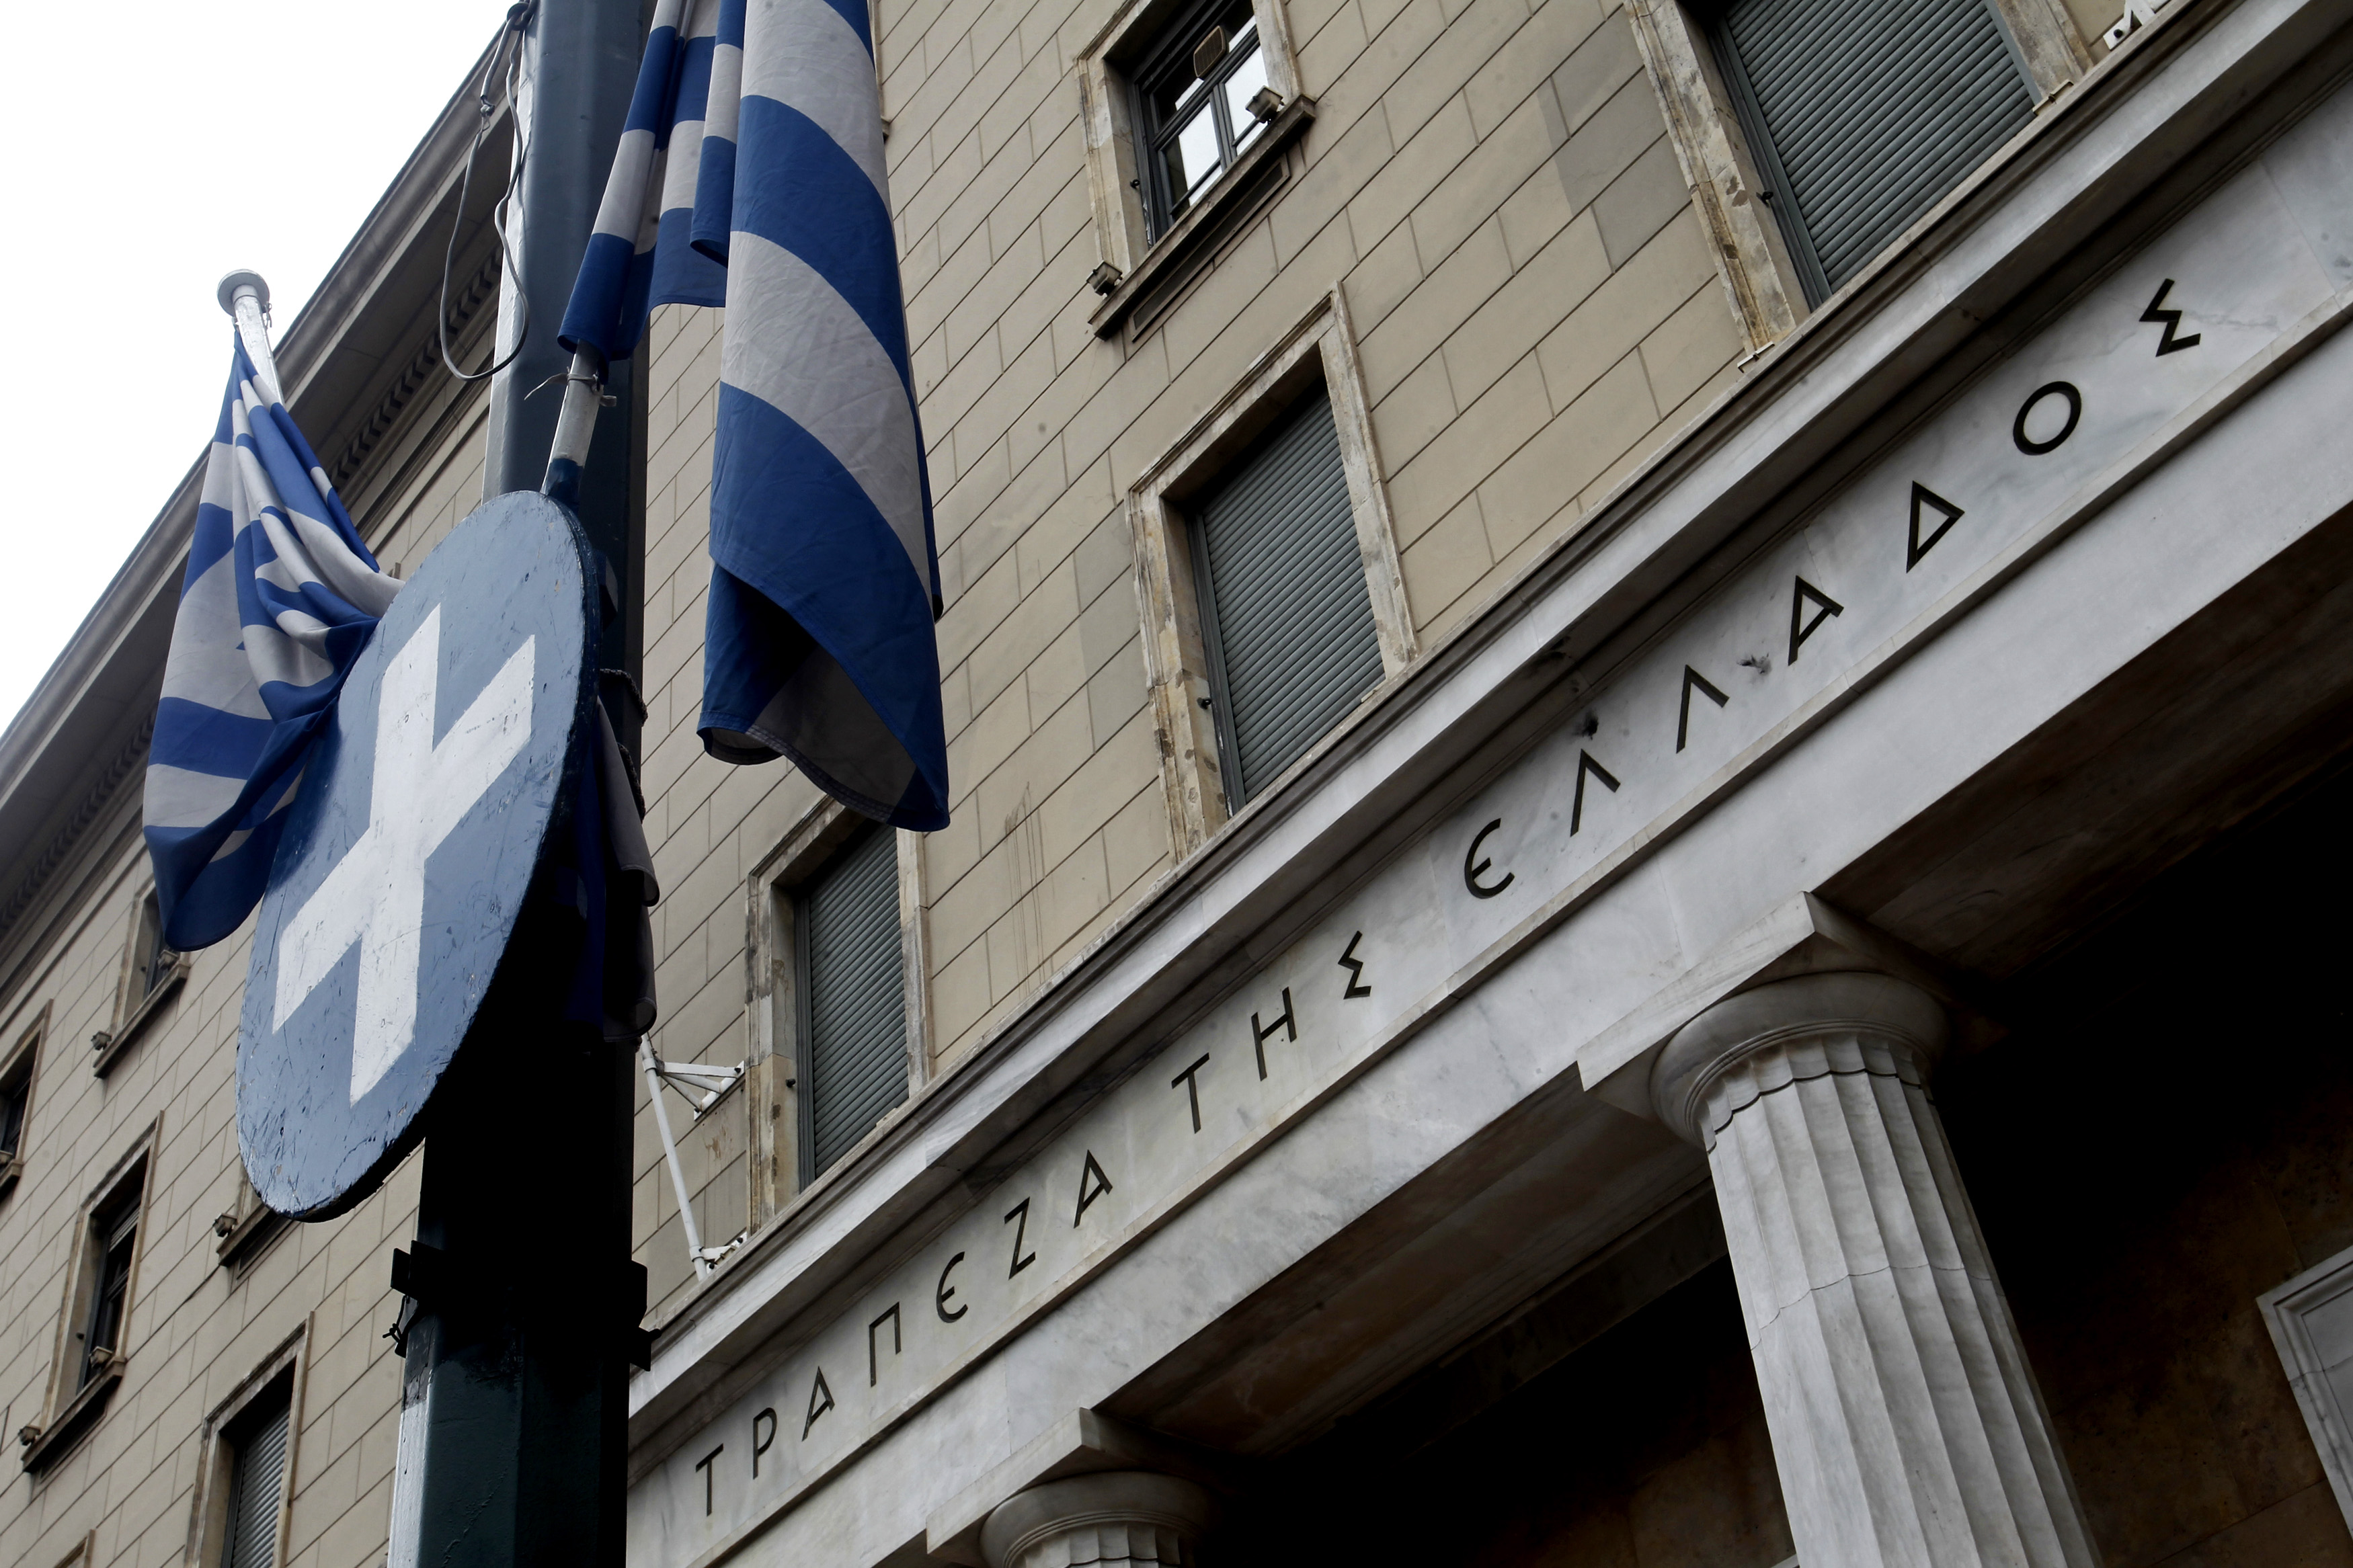 Greek banks brace for stress tests, beginning today, with results in May